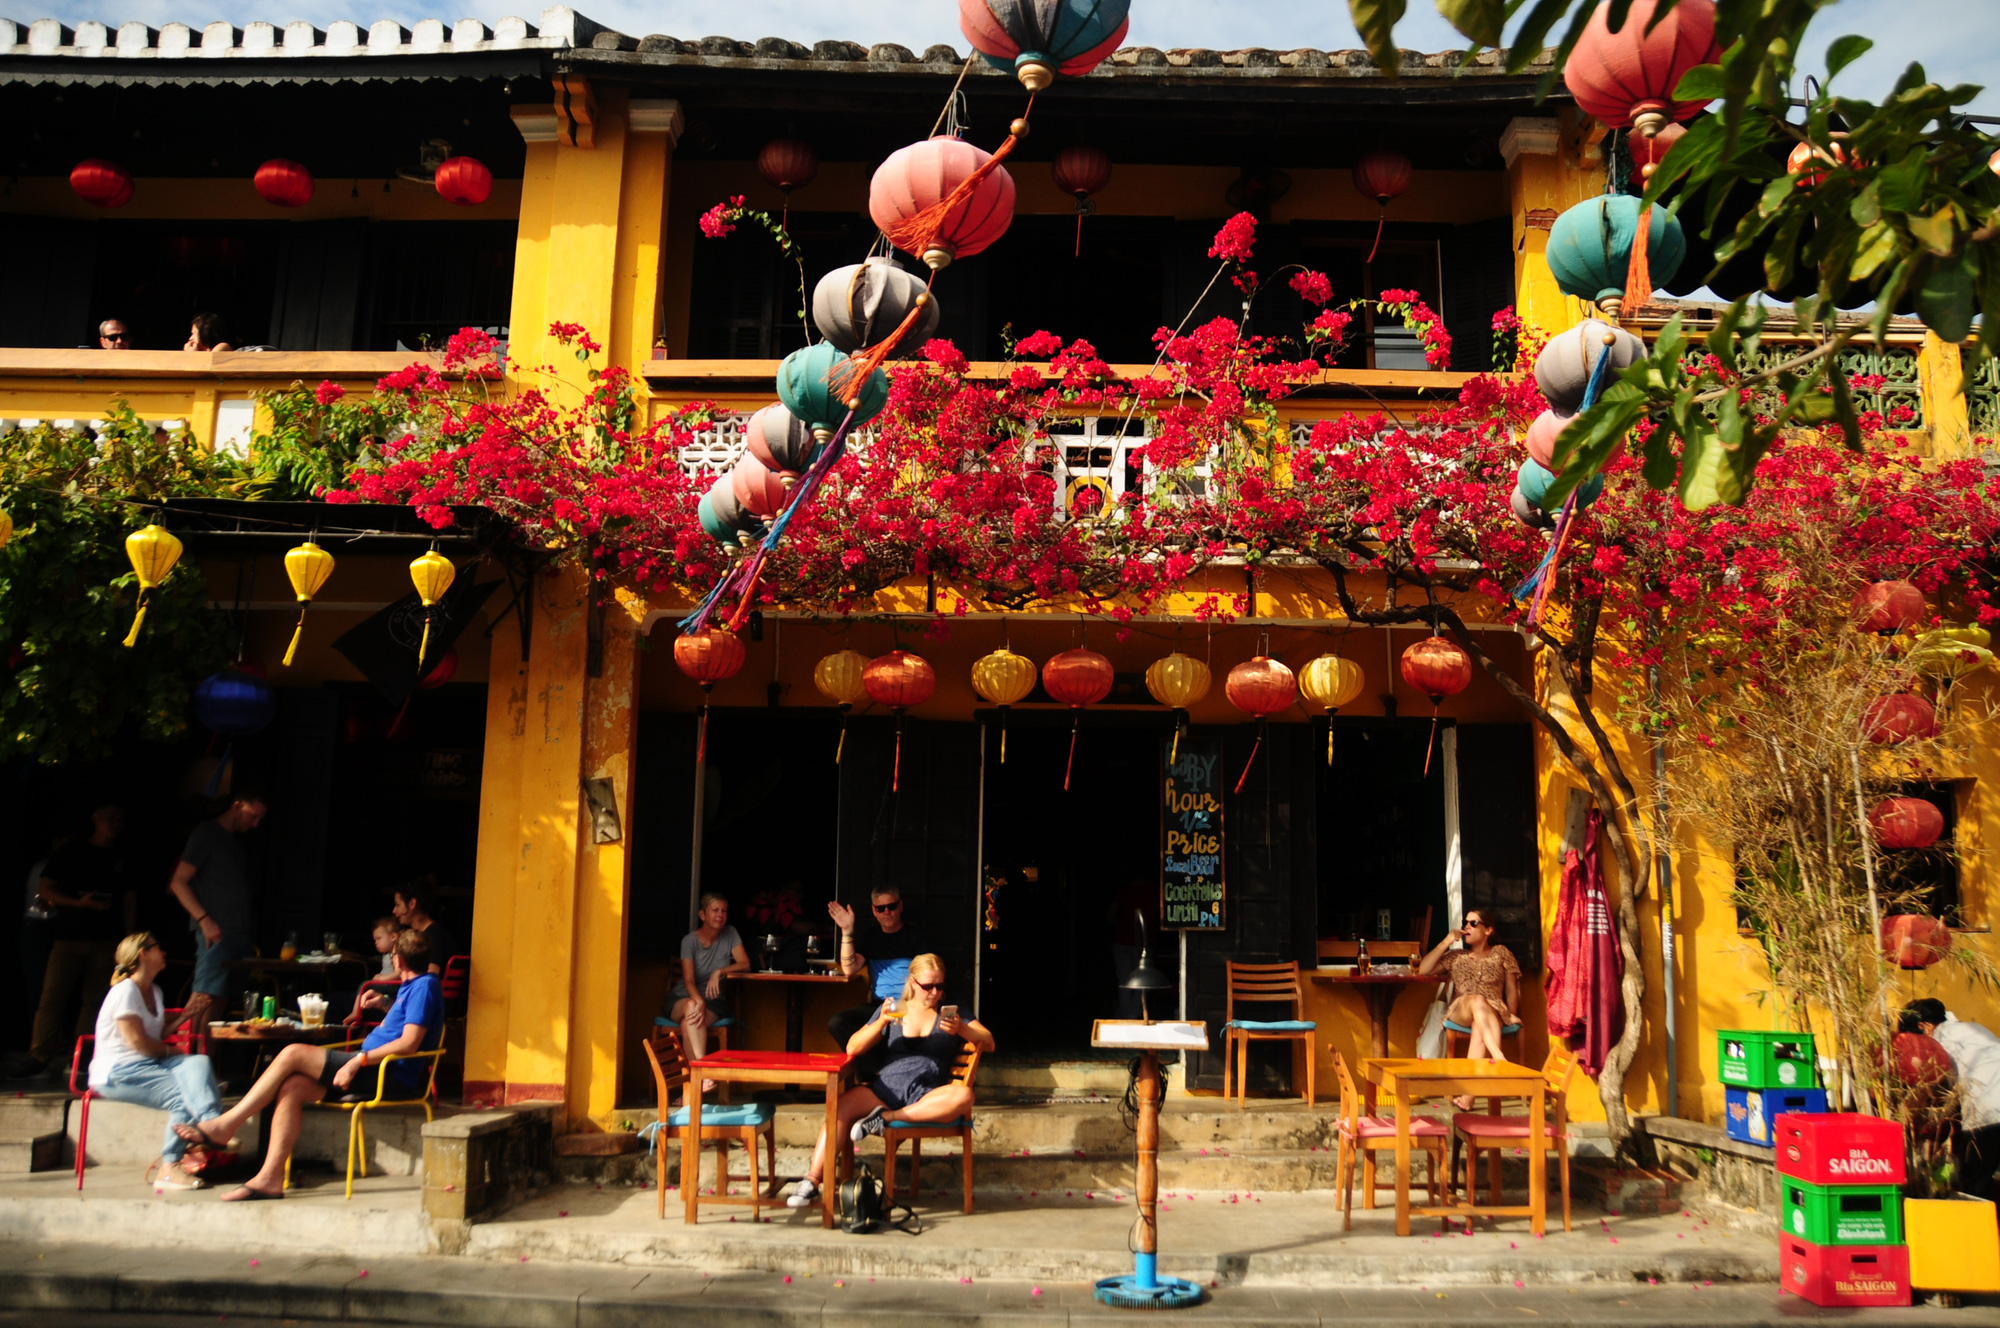 Quang Nam chooses Hoi An Ancient Town and My Son Temple Area to pilot international tourists in the first phase